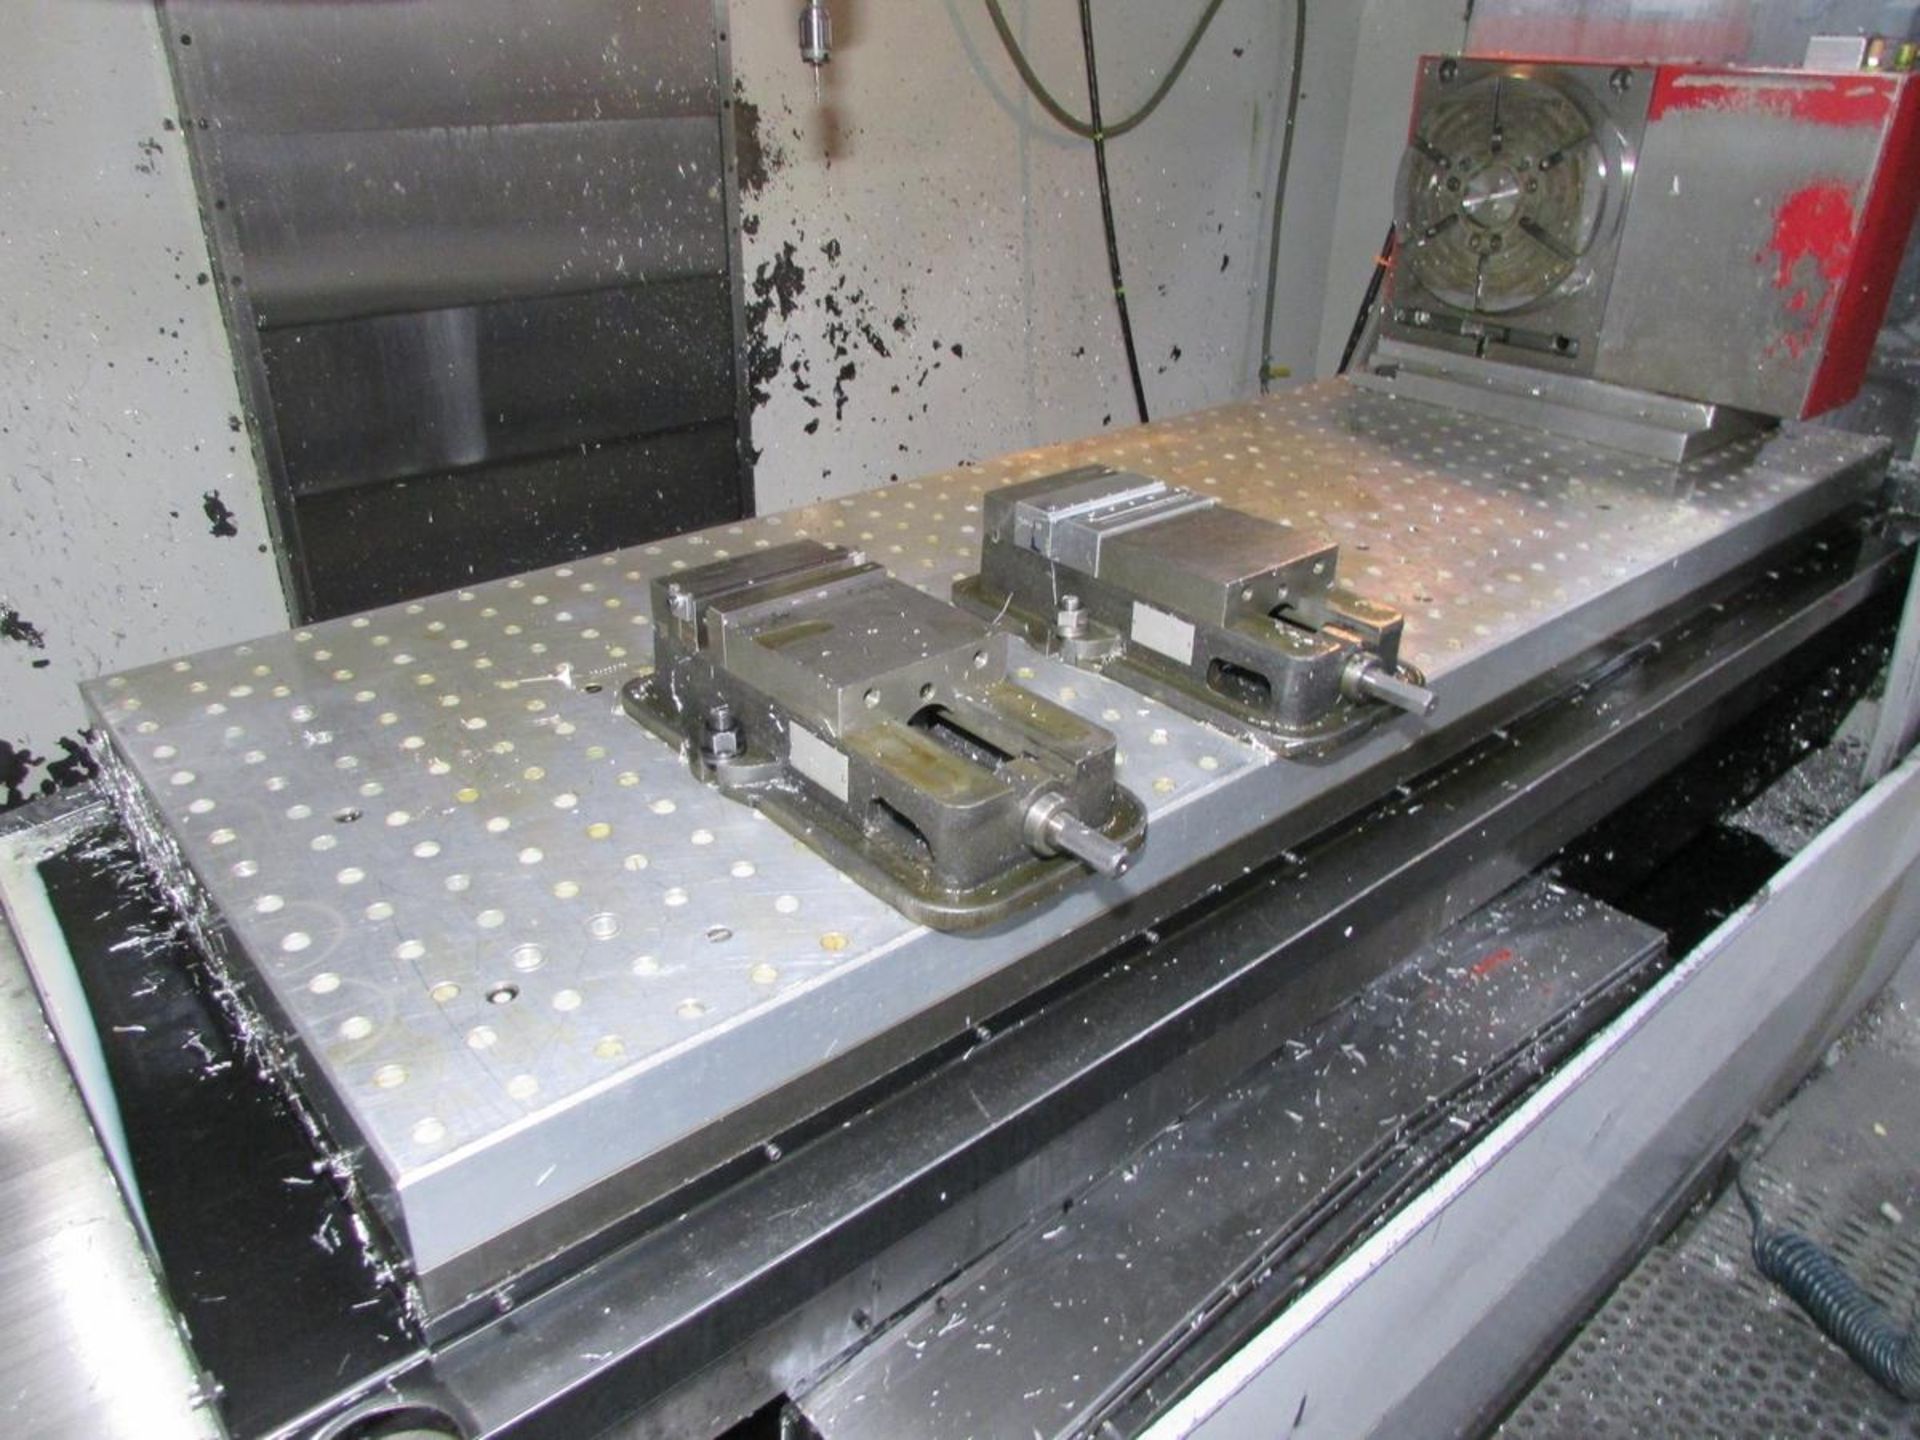 1997 Haas VF-7 4-Axis CNC Vertical Maching Center - Image 11 of 30